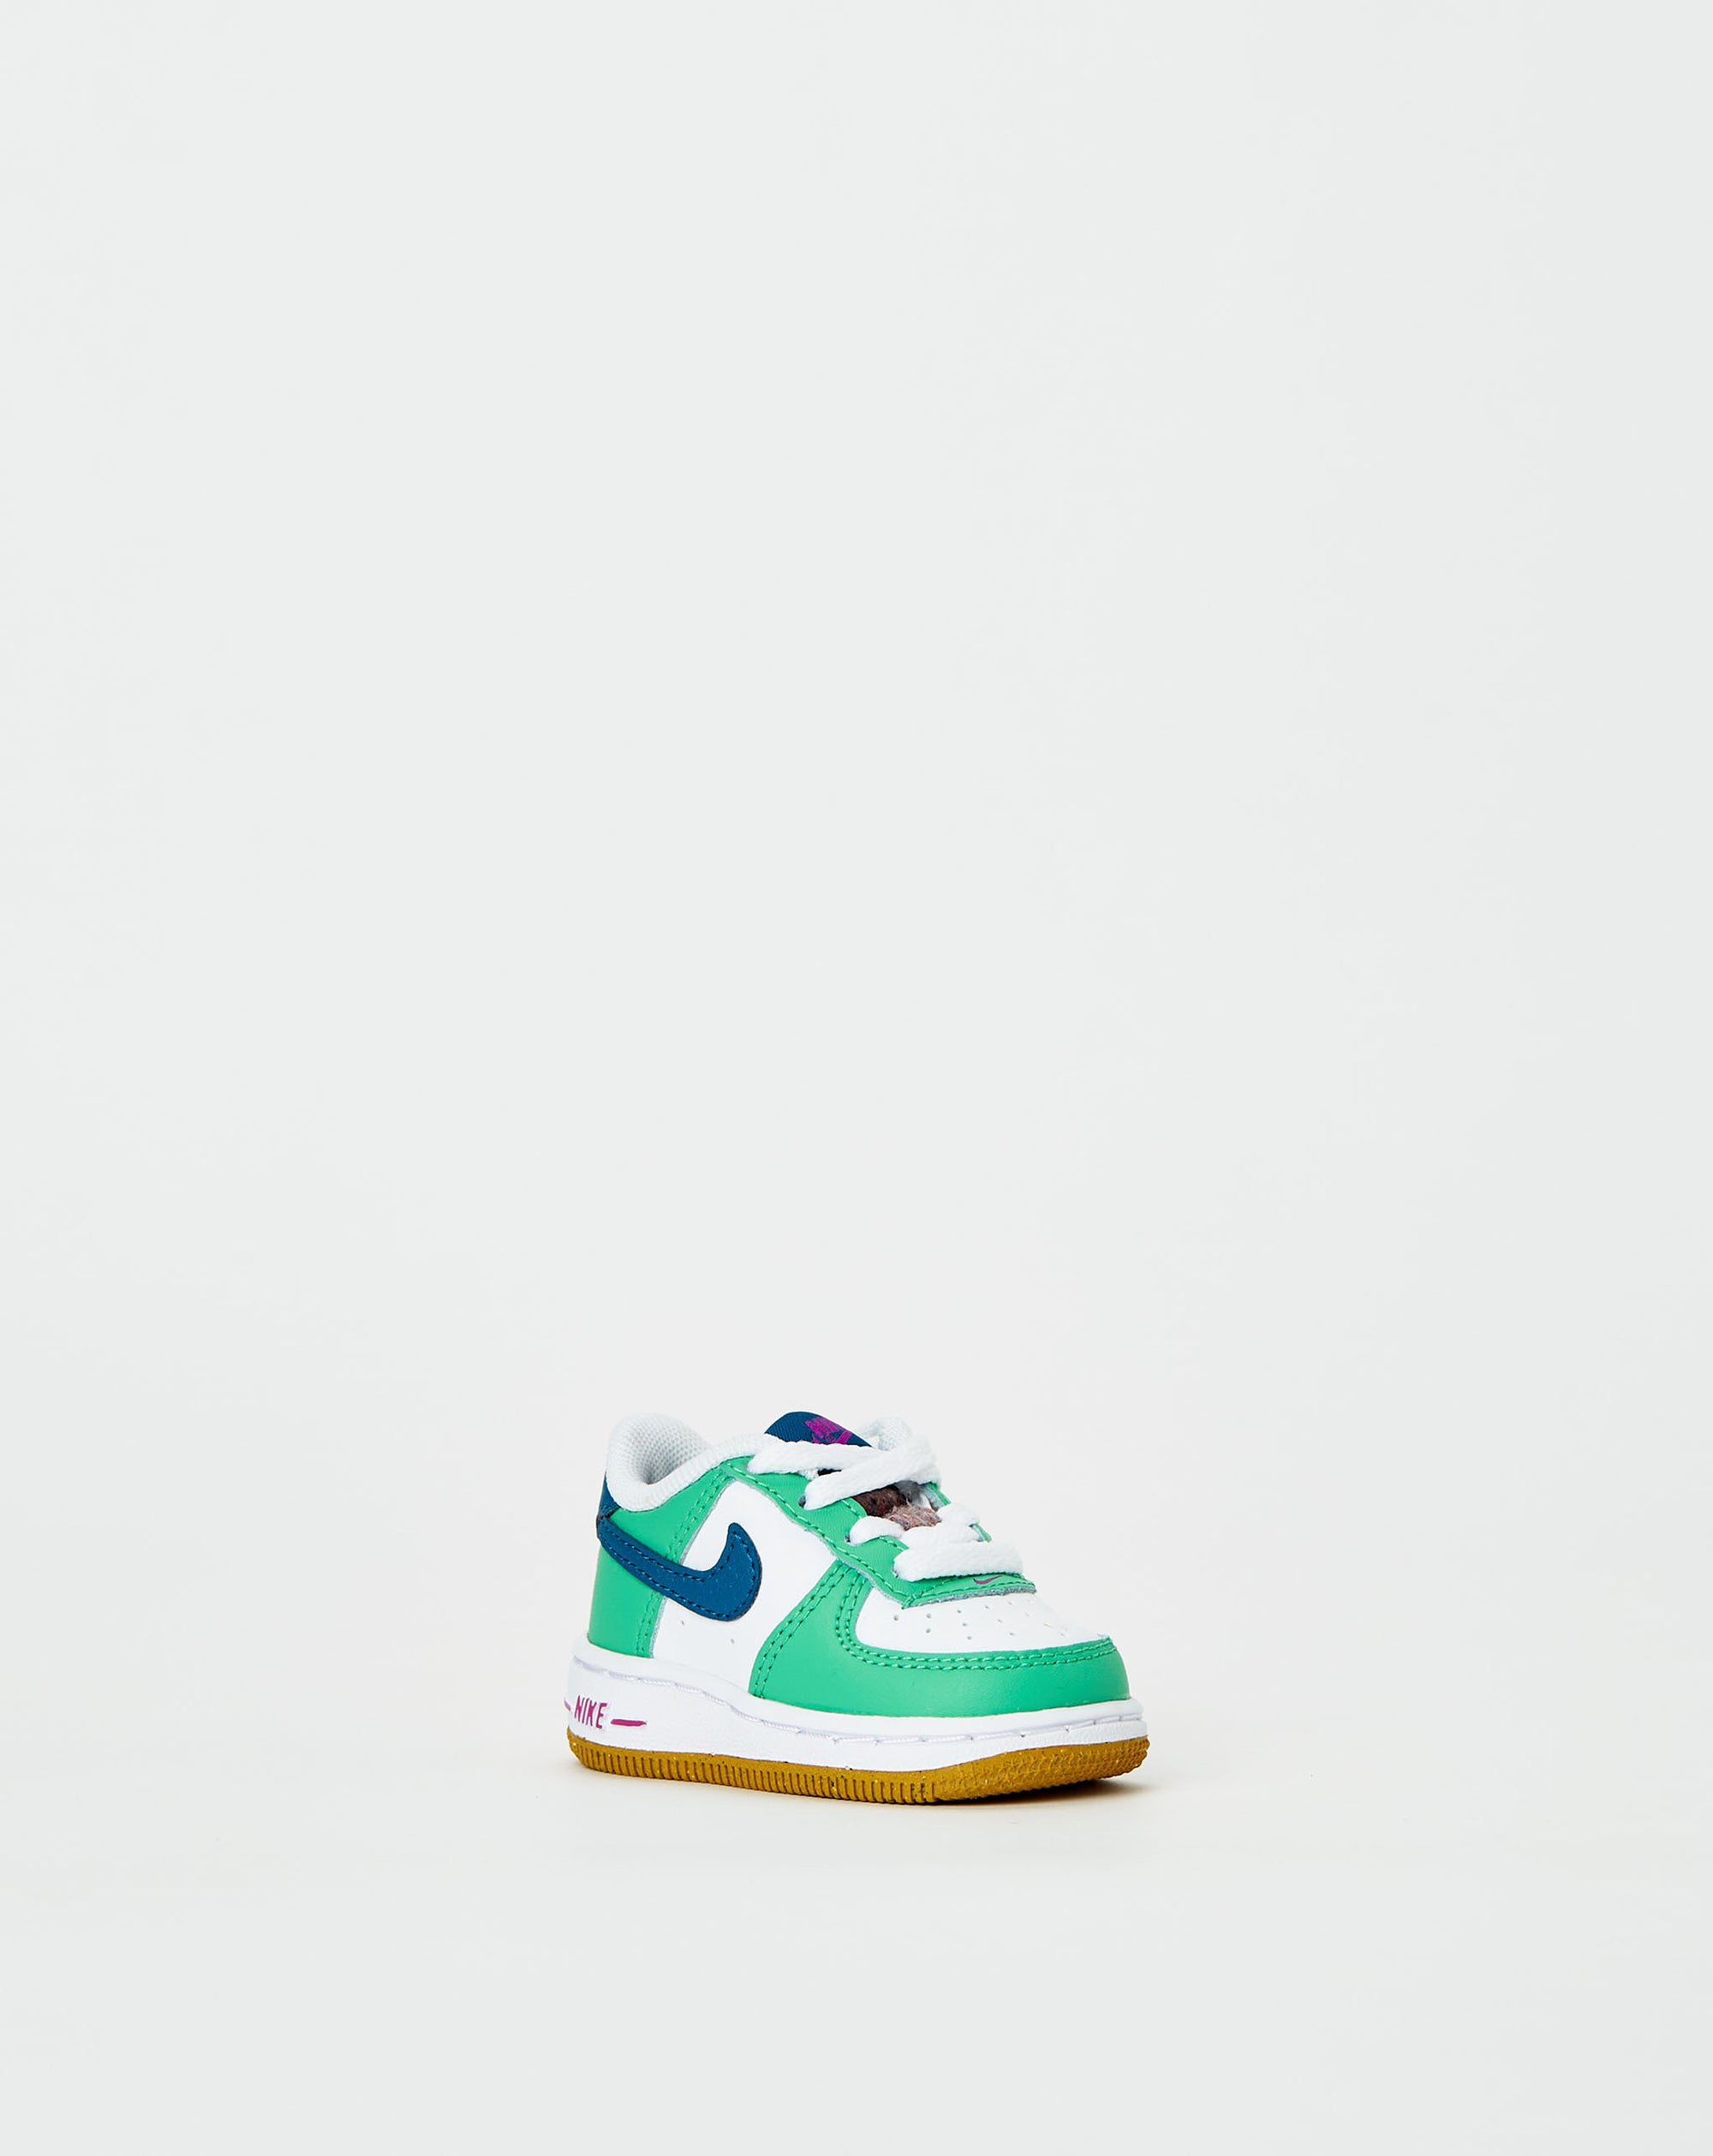 Nike Force 1 LV8 3 Baby/Toddler Shoes in White, Size: 7C | Dj2600-100